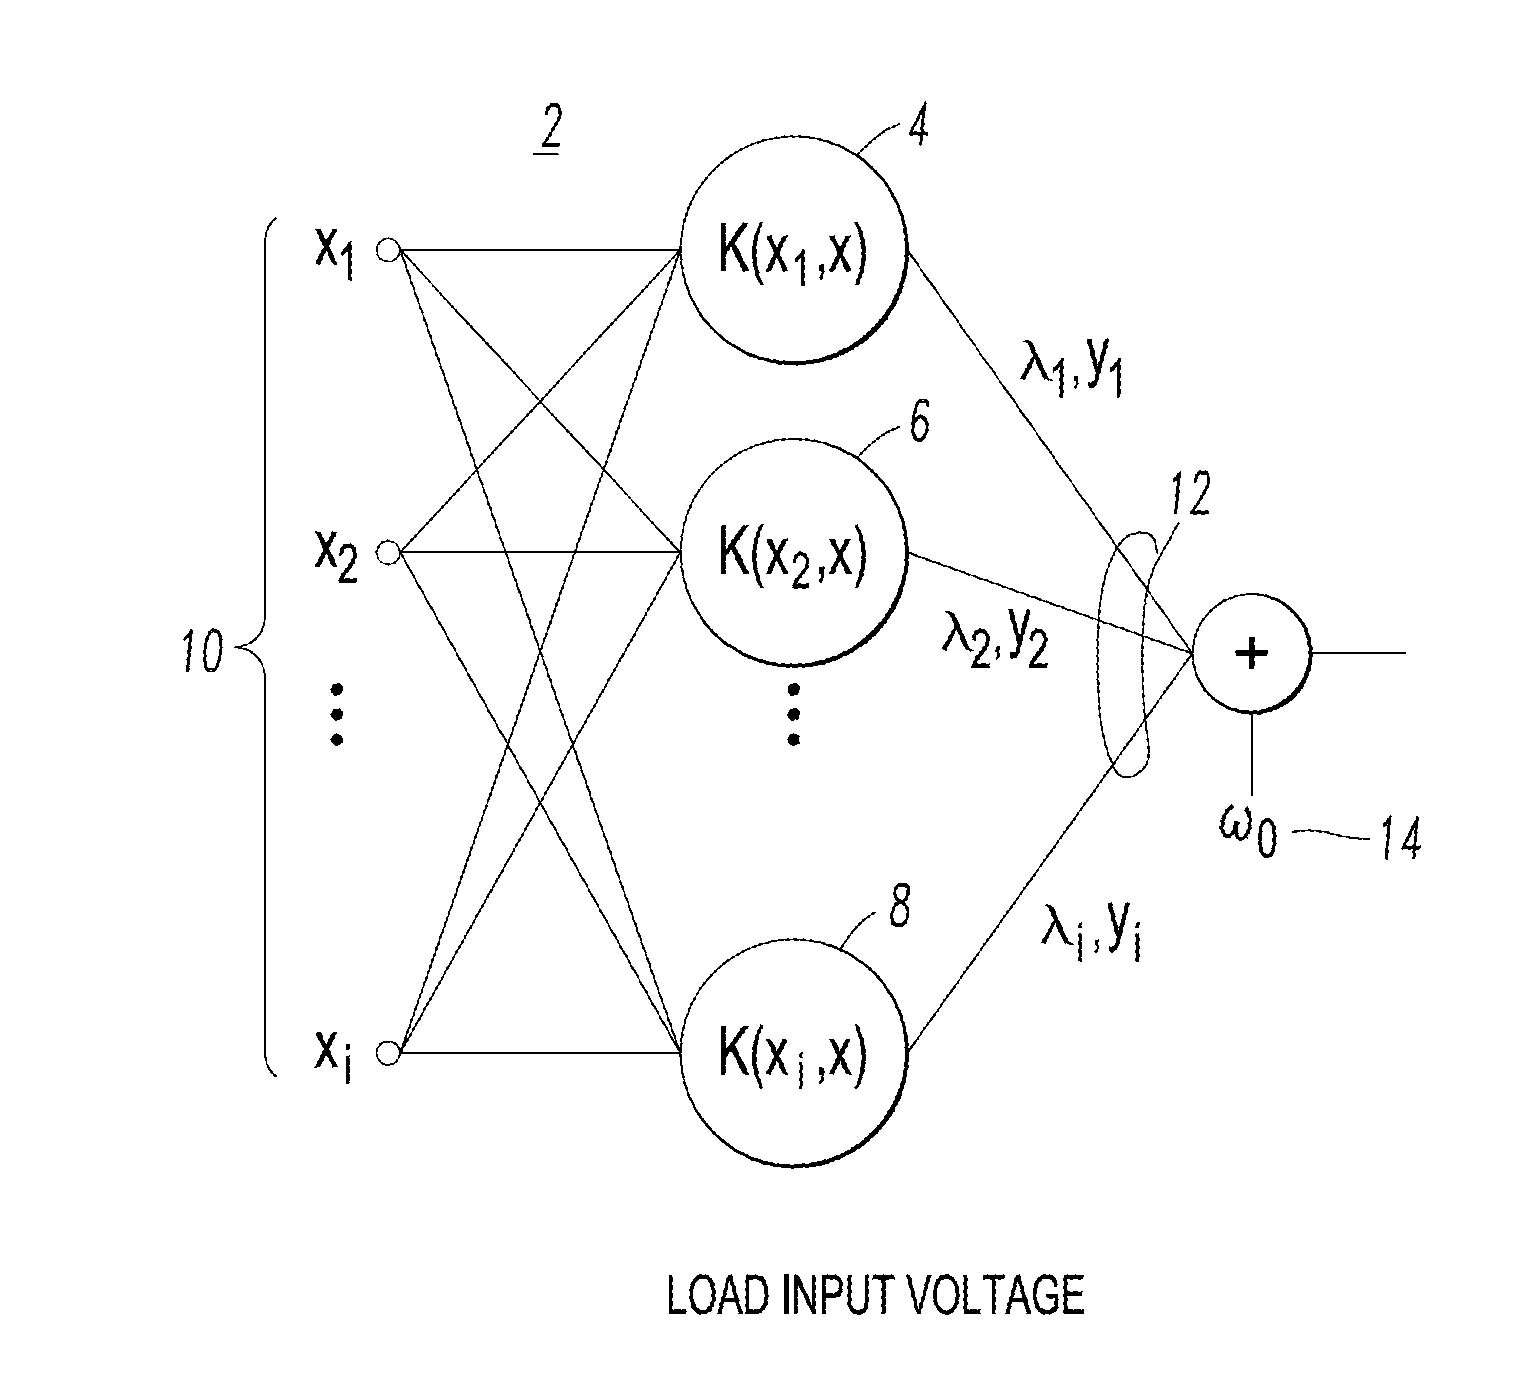 System and method for electric load identification and classification employing support vector machine